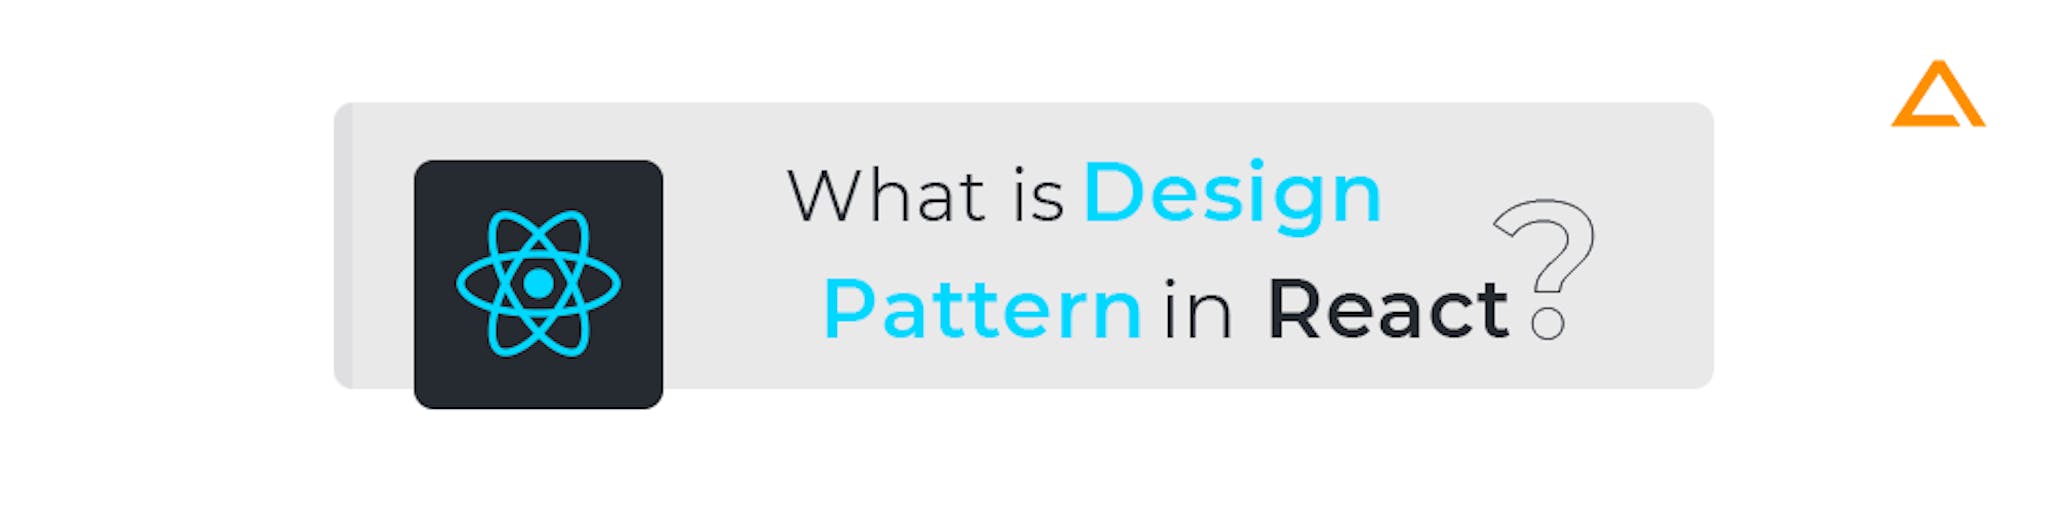 What is Design Pattern in React